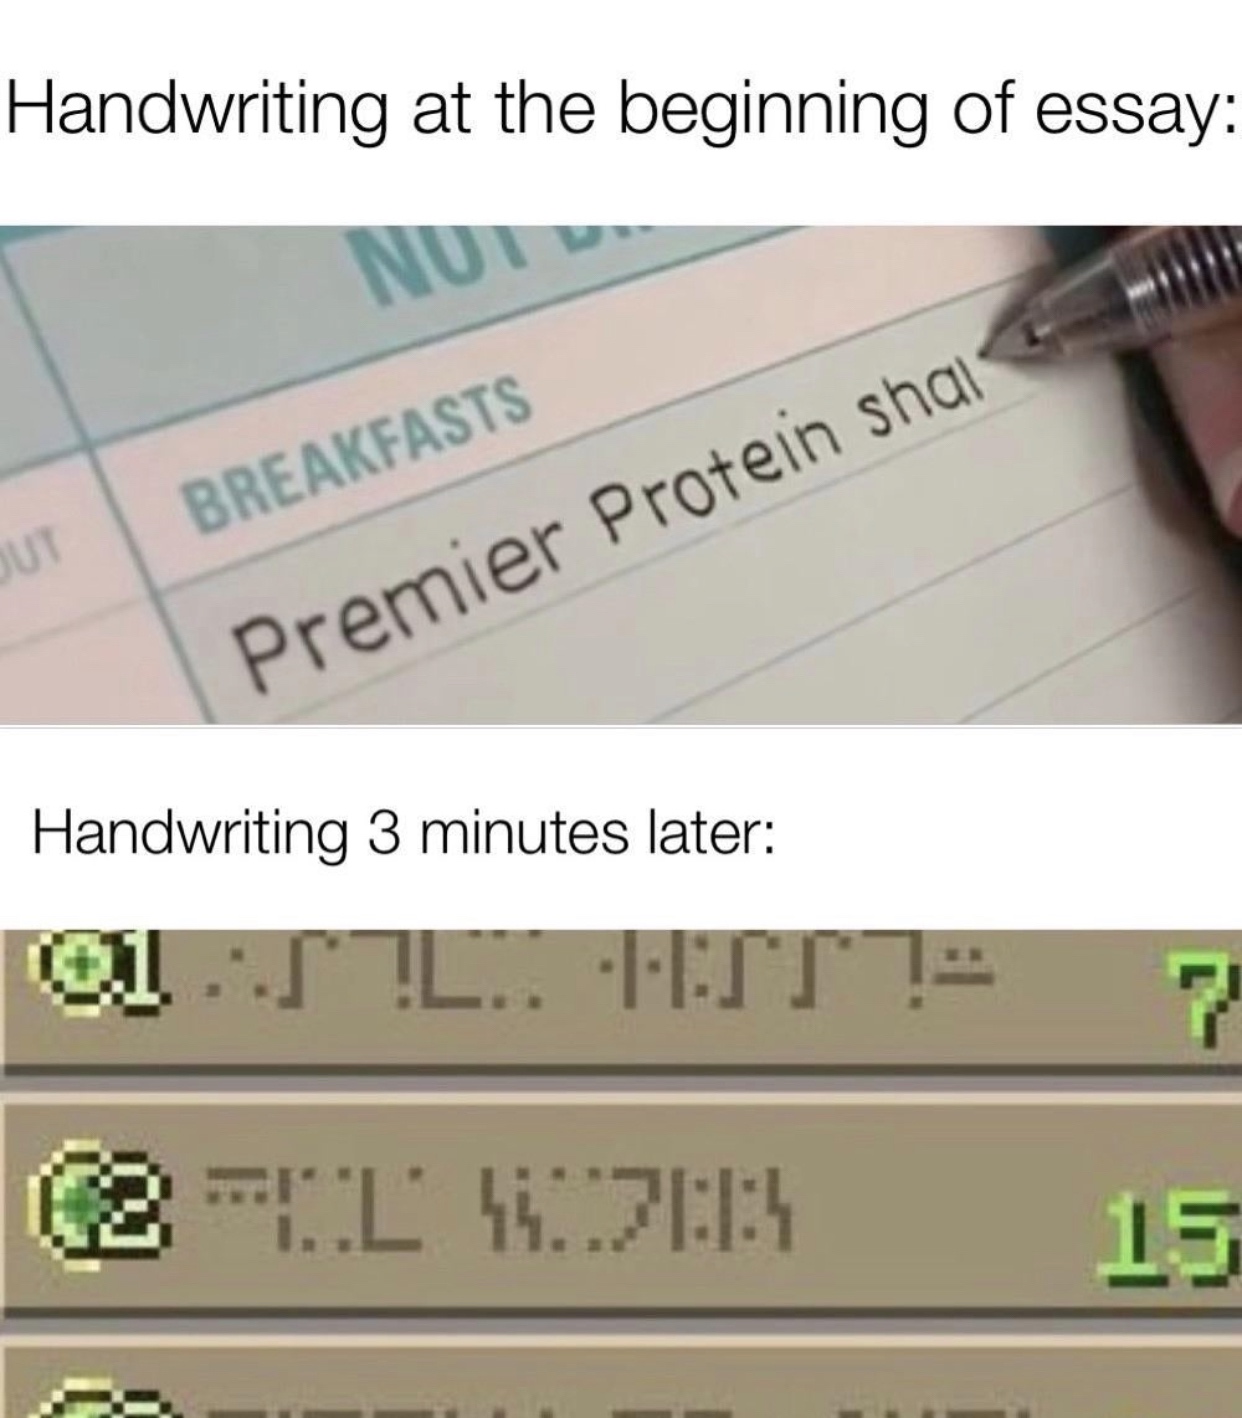 software - Handwriting at the beginning of essay Breakfasts Out Premier Protein shal Handwriting 3 minutes later 011'!.. Hit! IL101 15